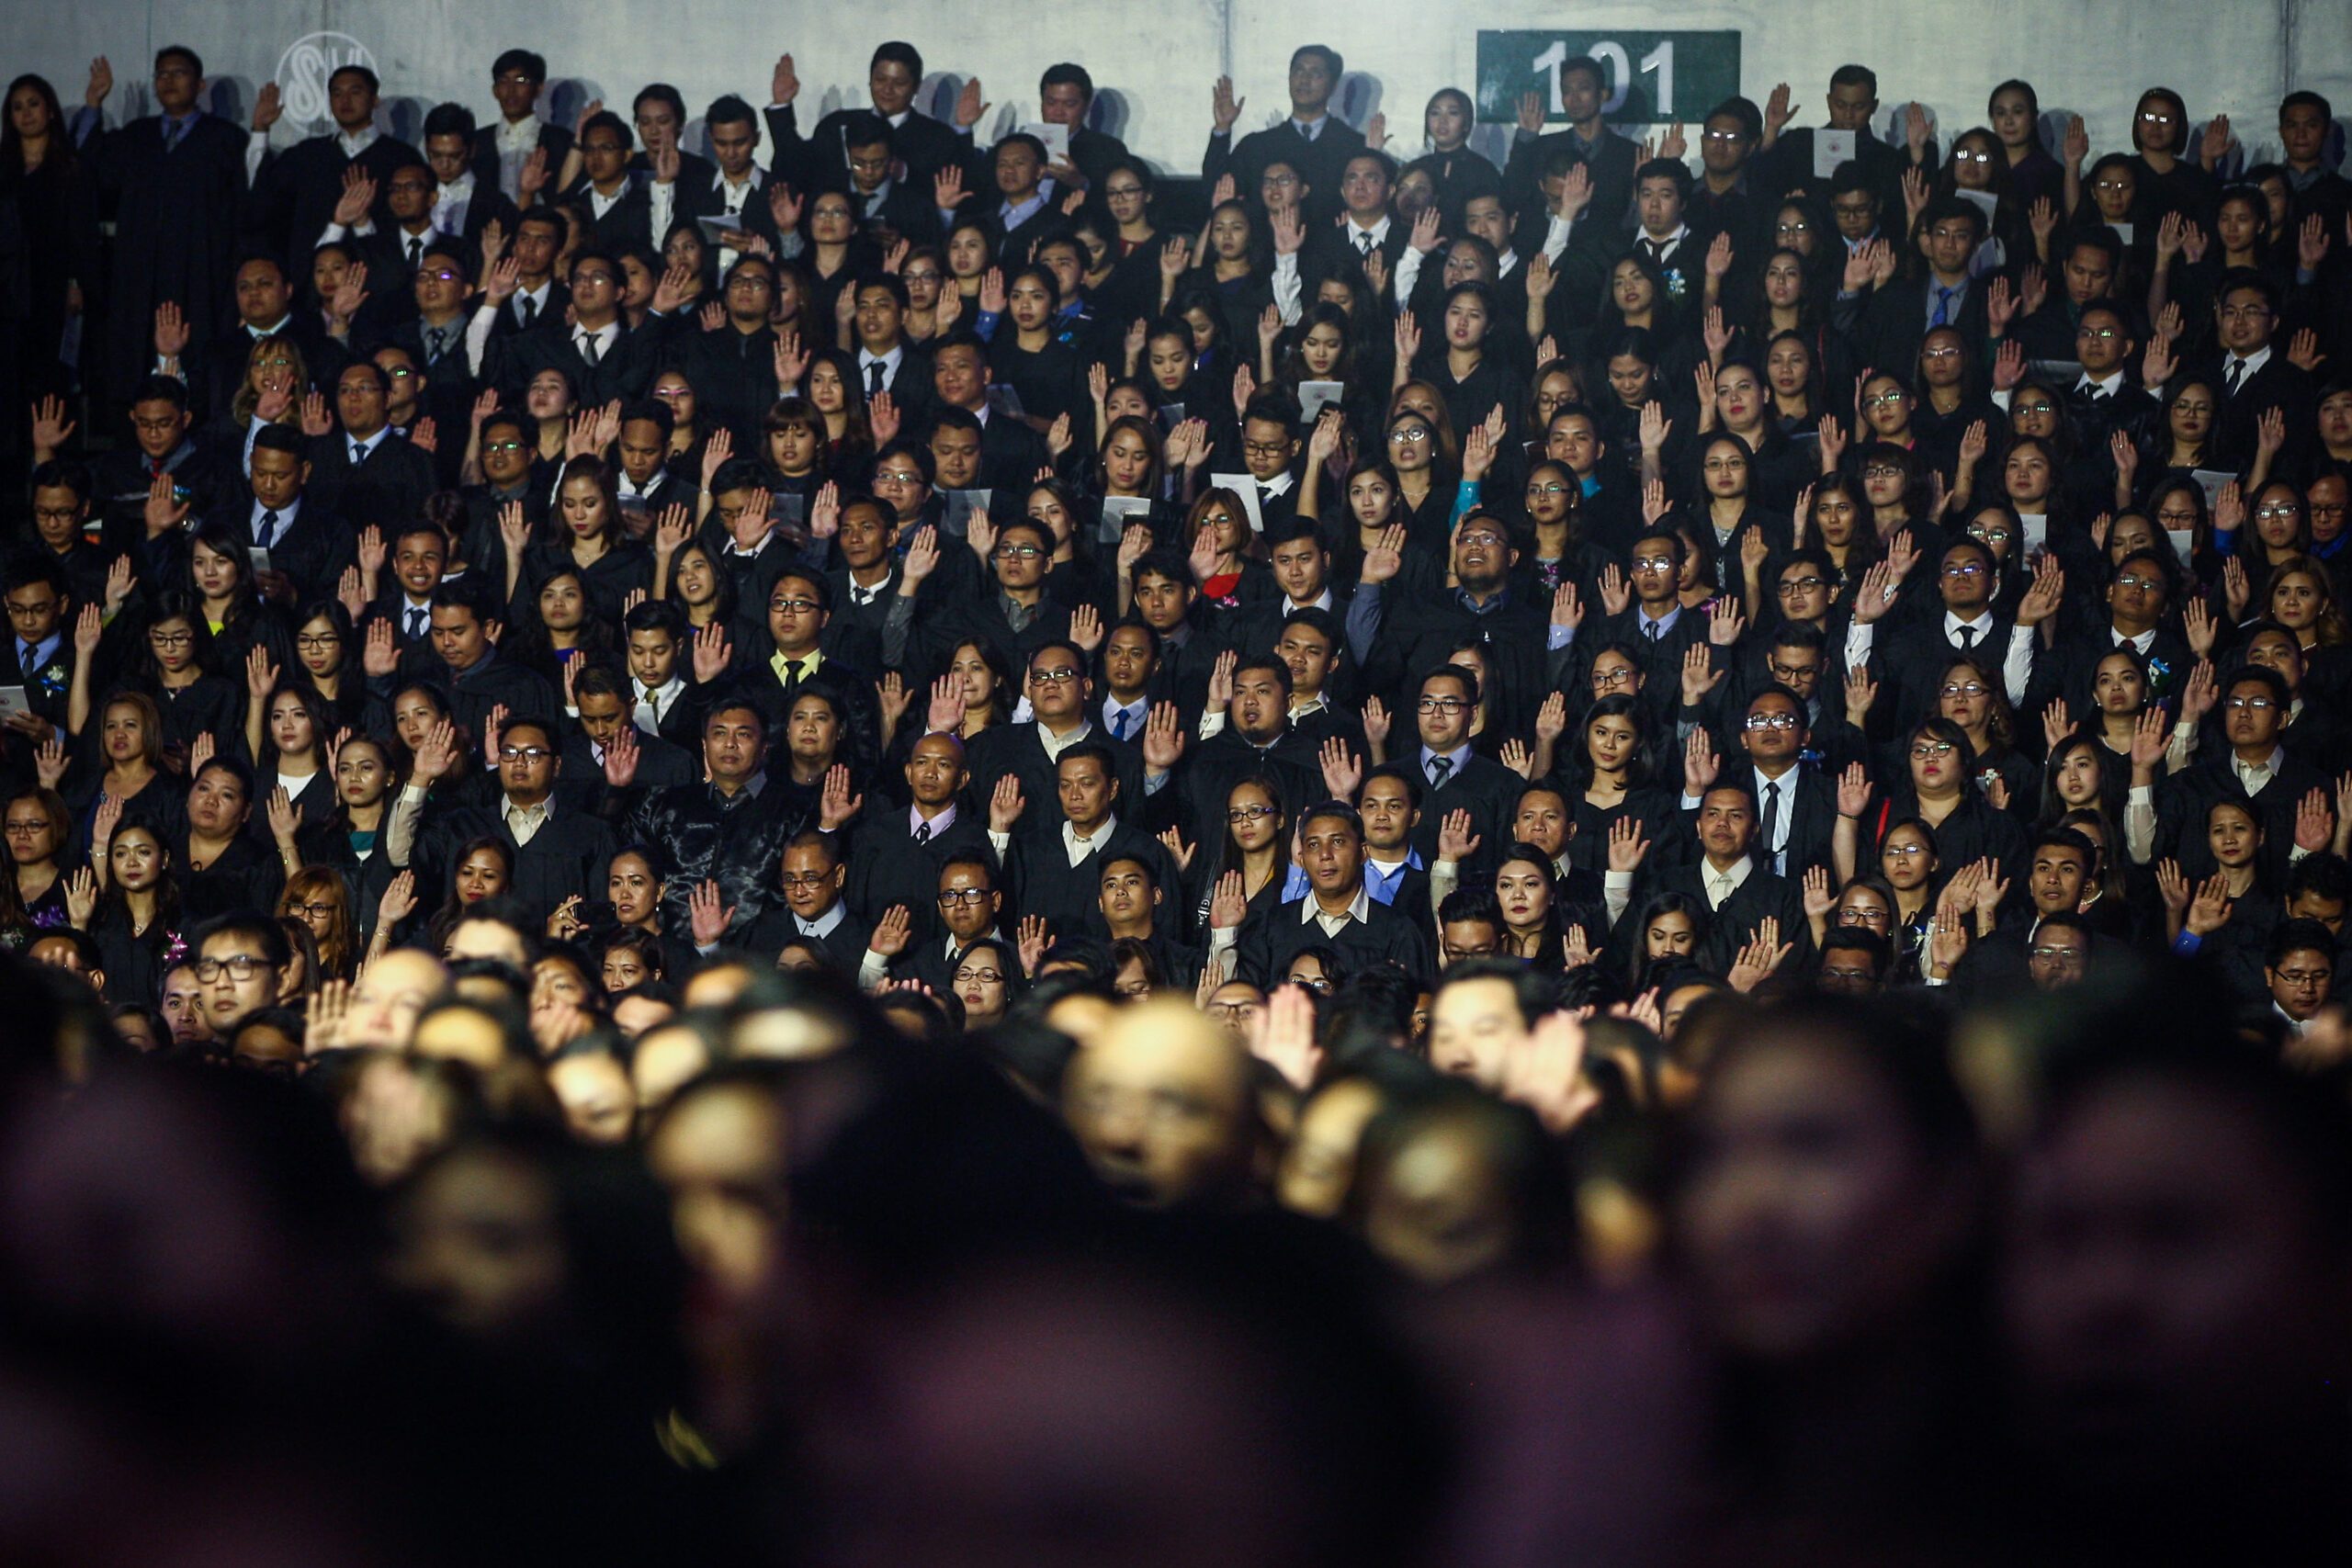 Bar examinees urged: Become people’s lawyers, human rights defenders